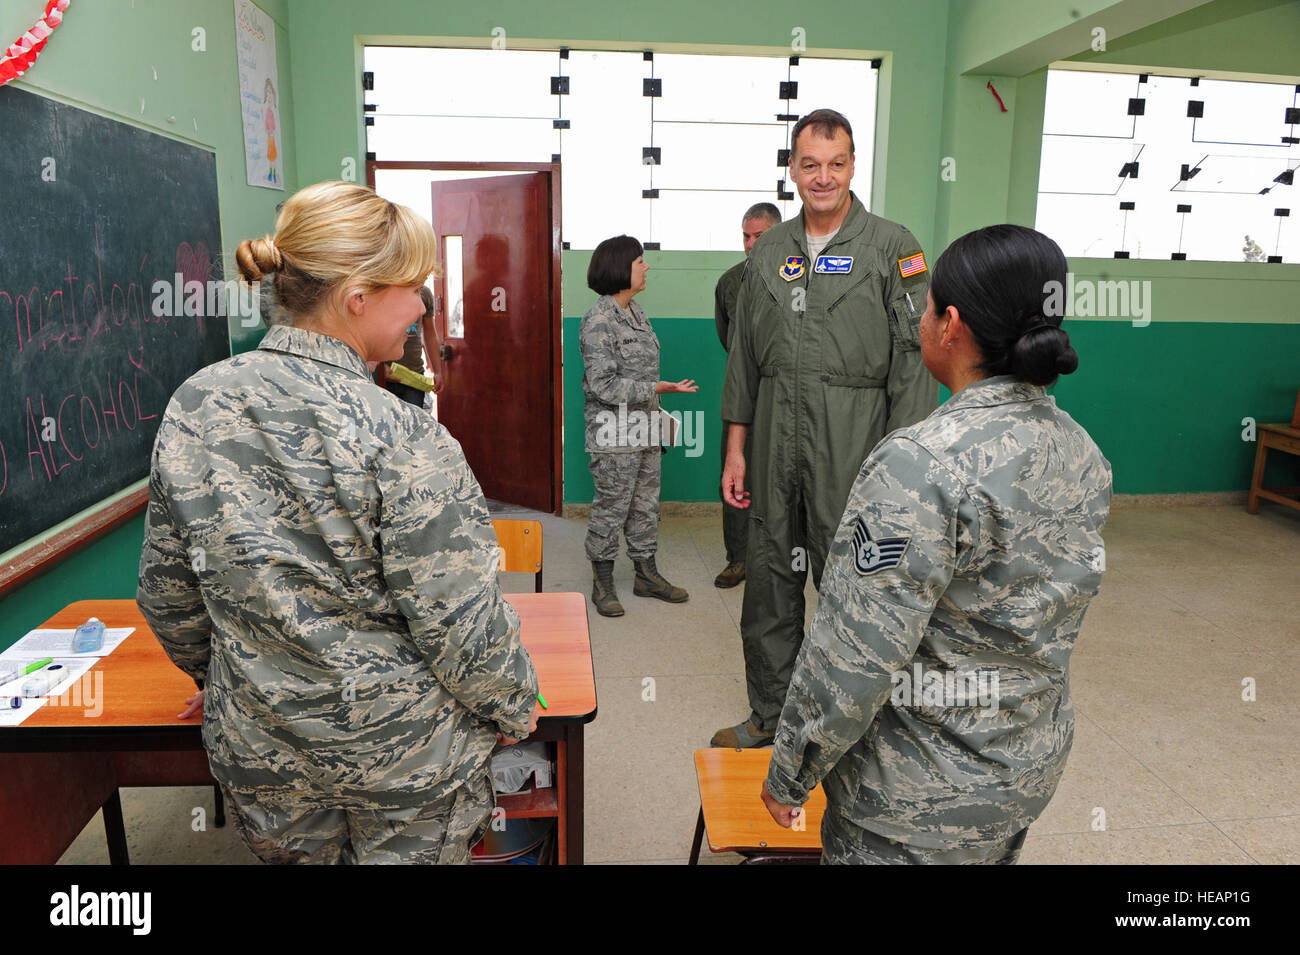 U.S. Air Force Brig. Gen. Kory Cornum, center right, the commander of the 81st Medical Group (MDG) at Keesler Air Force Base, Miss., greets 81st MDG Airmen taking part in a medical readiness training exercise July 25, 2012, in San Miguel, Peru, as part of New Horizons 2012. New Horizons is a U.S. Southern Command-sponsored annual series of joint humanitarian assistance exercises deploying U.S. military engineers, veterinarians, medics and other professions to Central and South American nations for training, construction projects and to provide humanitarian and medical services.  Staff Sgt. Mic Stock Photo